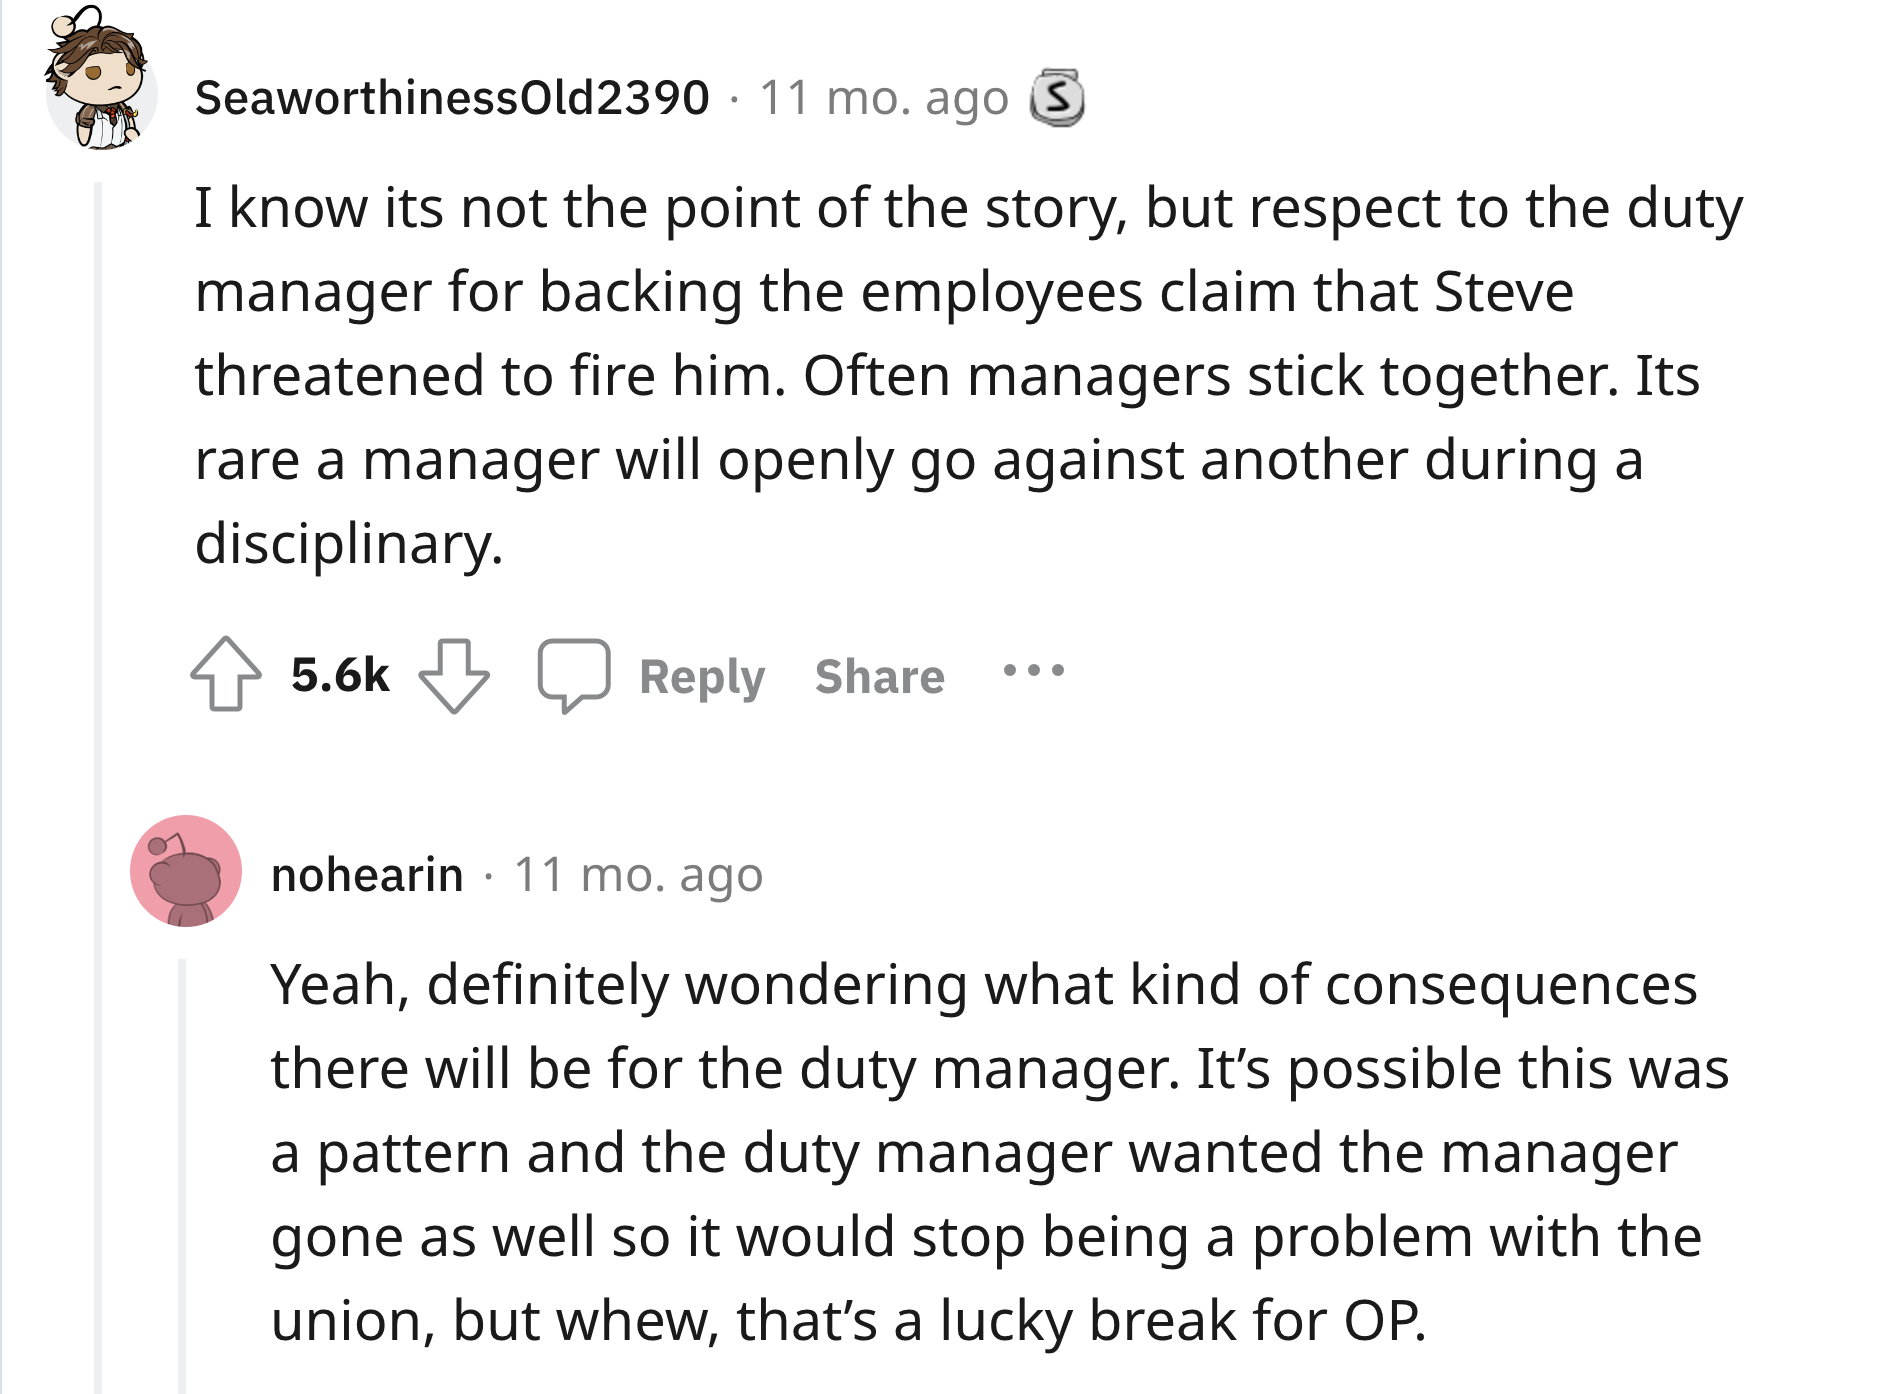 Boss Illegally Demands Doctor’s Note, So Doctor Recommends 2 Weeks Off - document - SeaworthinessOld2390 I know its not the point of the story, but respect to the duty manager for backing the employees claim that Steve threatened to fire him. Often manage